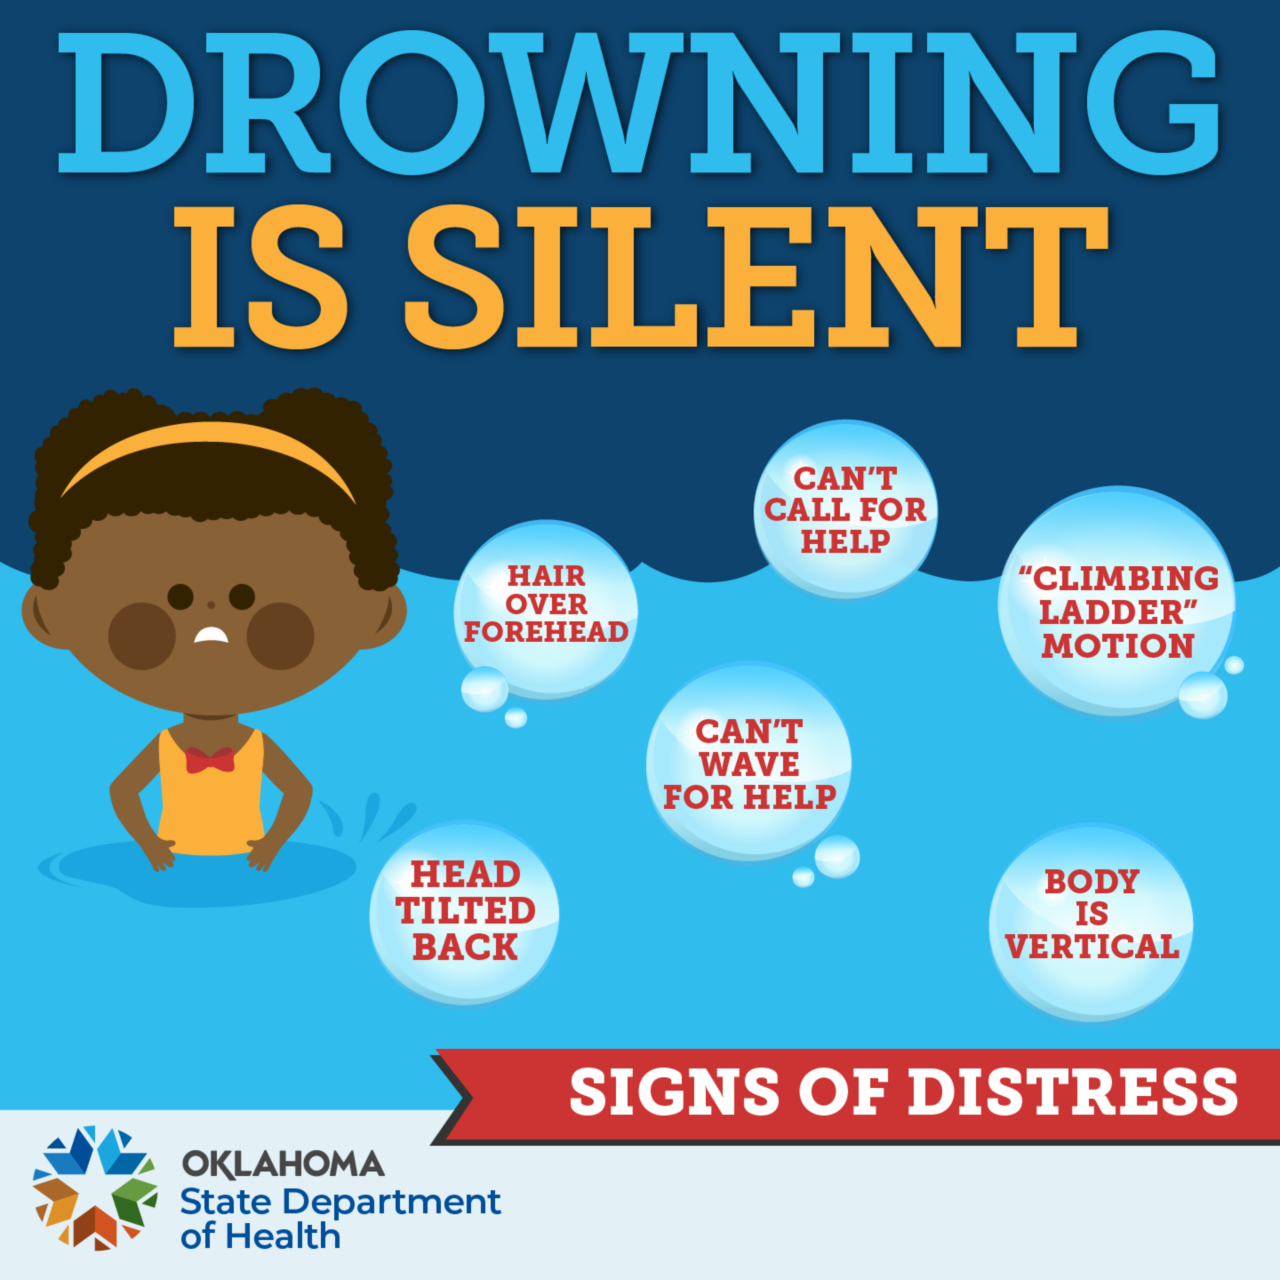 Drowning is Silent